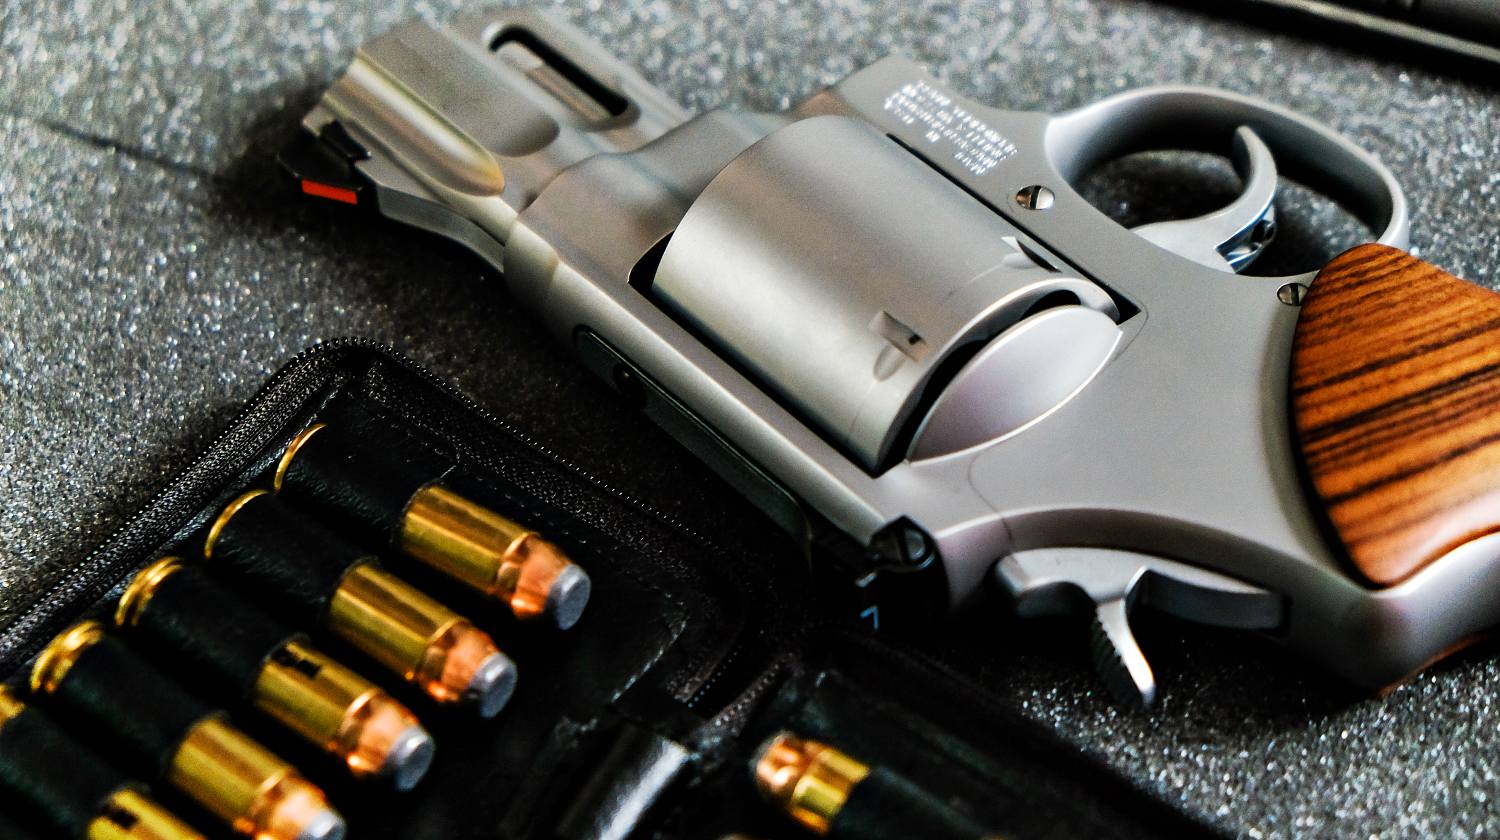 Featured | Metal revolver .44 magnum pistol gun with jacket soft point(JSP) bullet on dark background | The Ultimate Concealed Weapon | Smith And Wesson Model 642